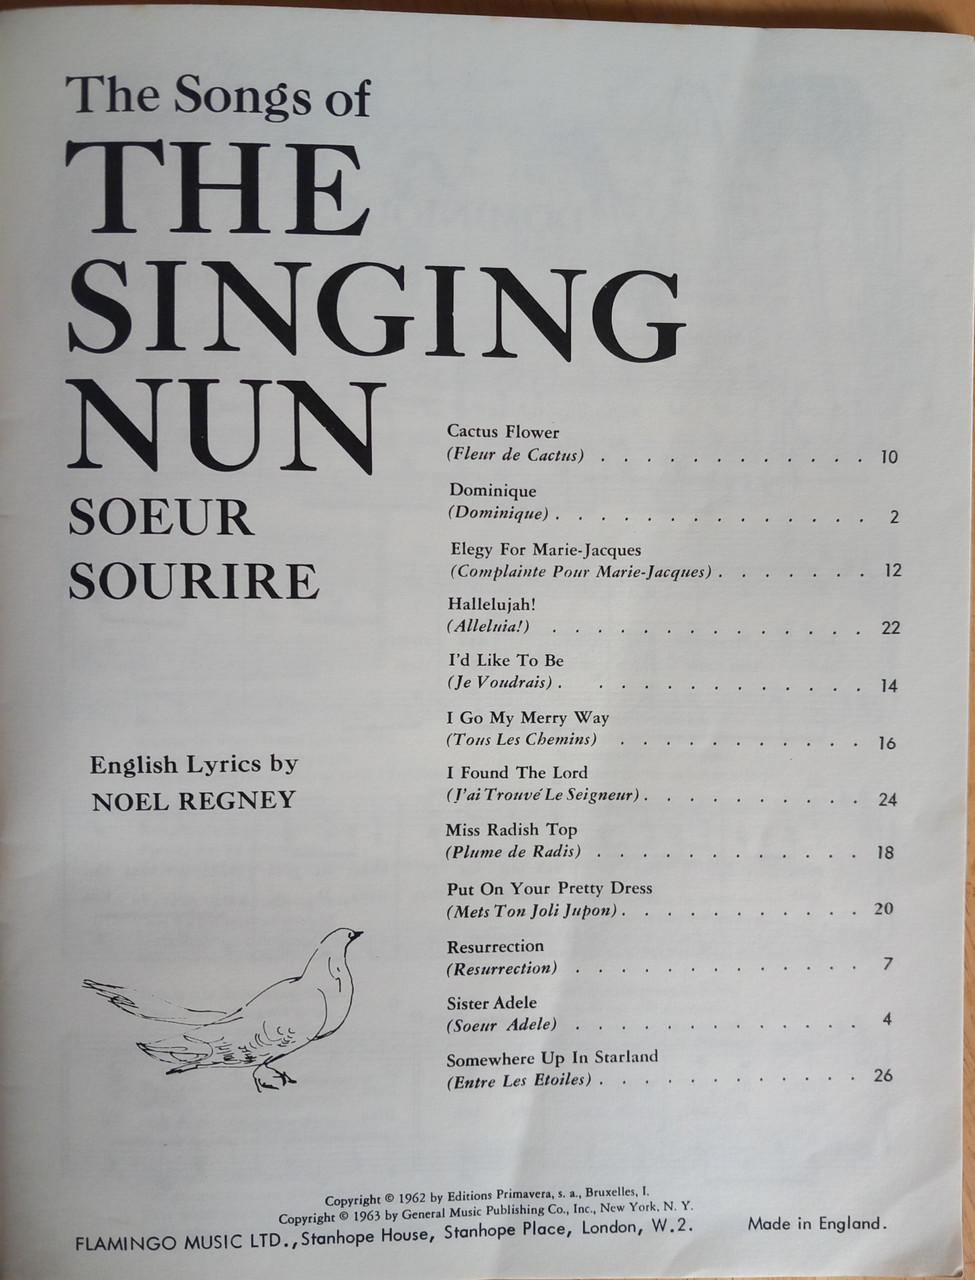 Flamingo Music Publishing - The Songs of the Singing Nun  : Soeur Sourire - 1963 -